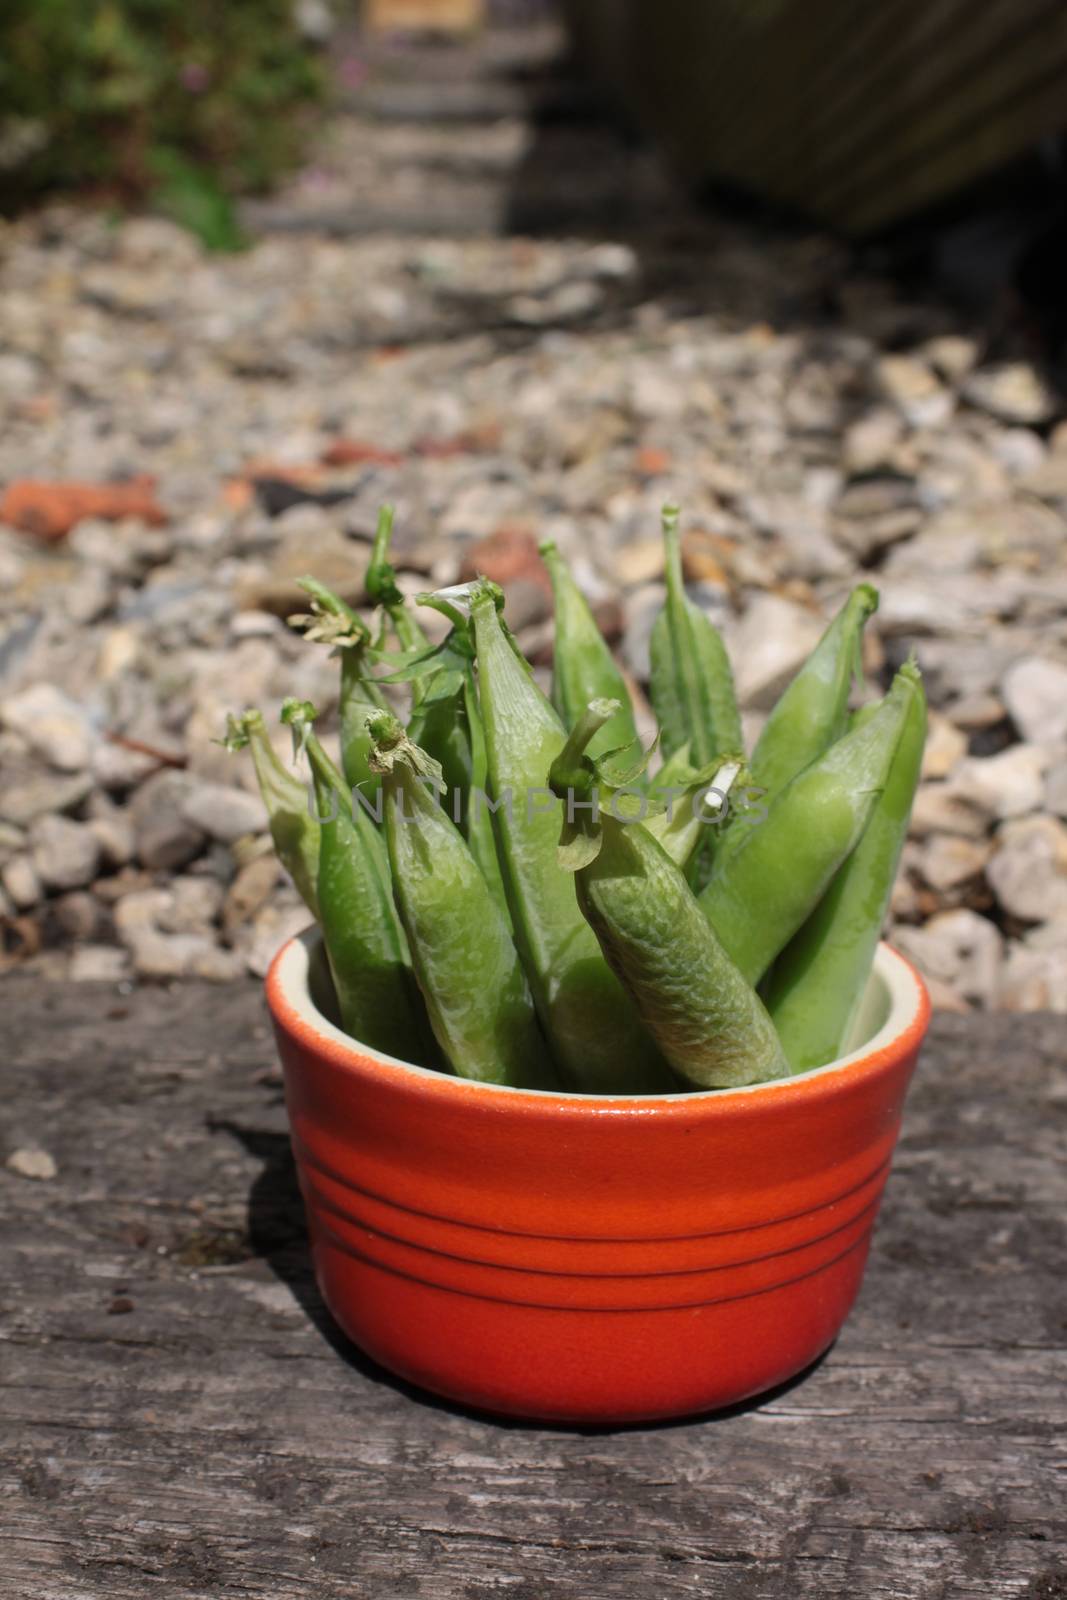 A crop of freshly picked organically grown peas in their pods. Set in a small orange ceramic bowl on a wooden base, with a gravel garden path in soft focus to background.